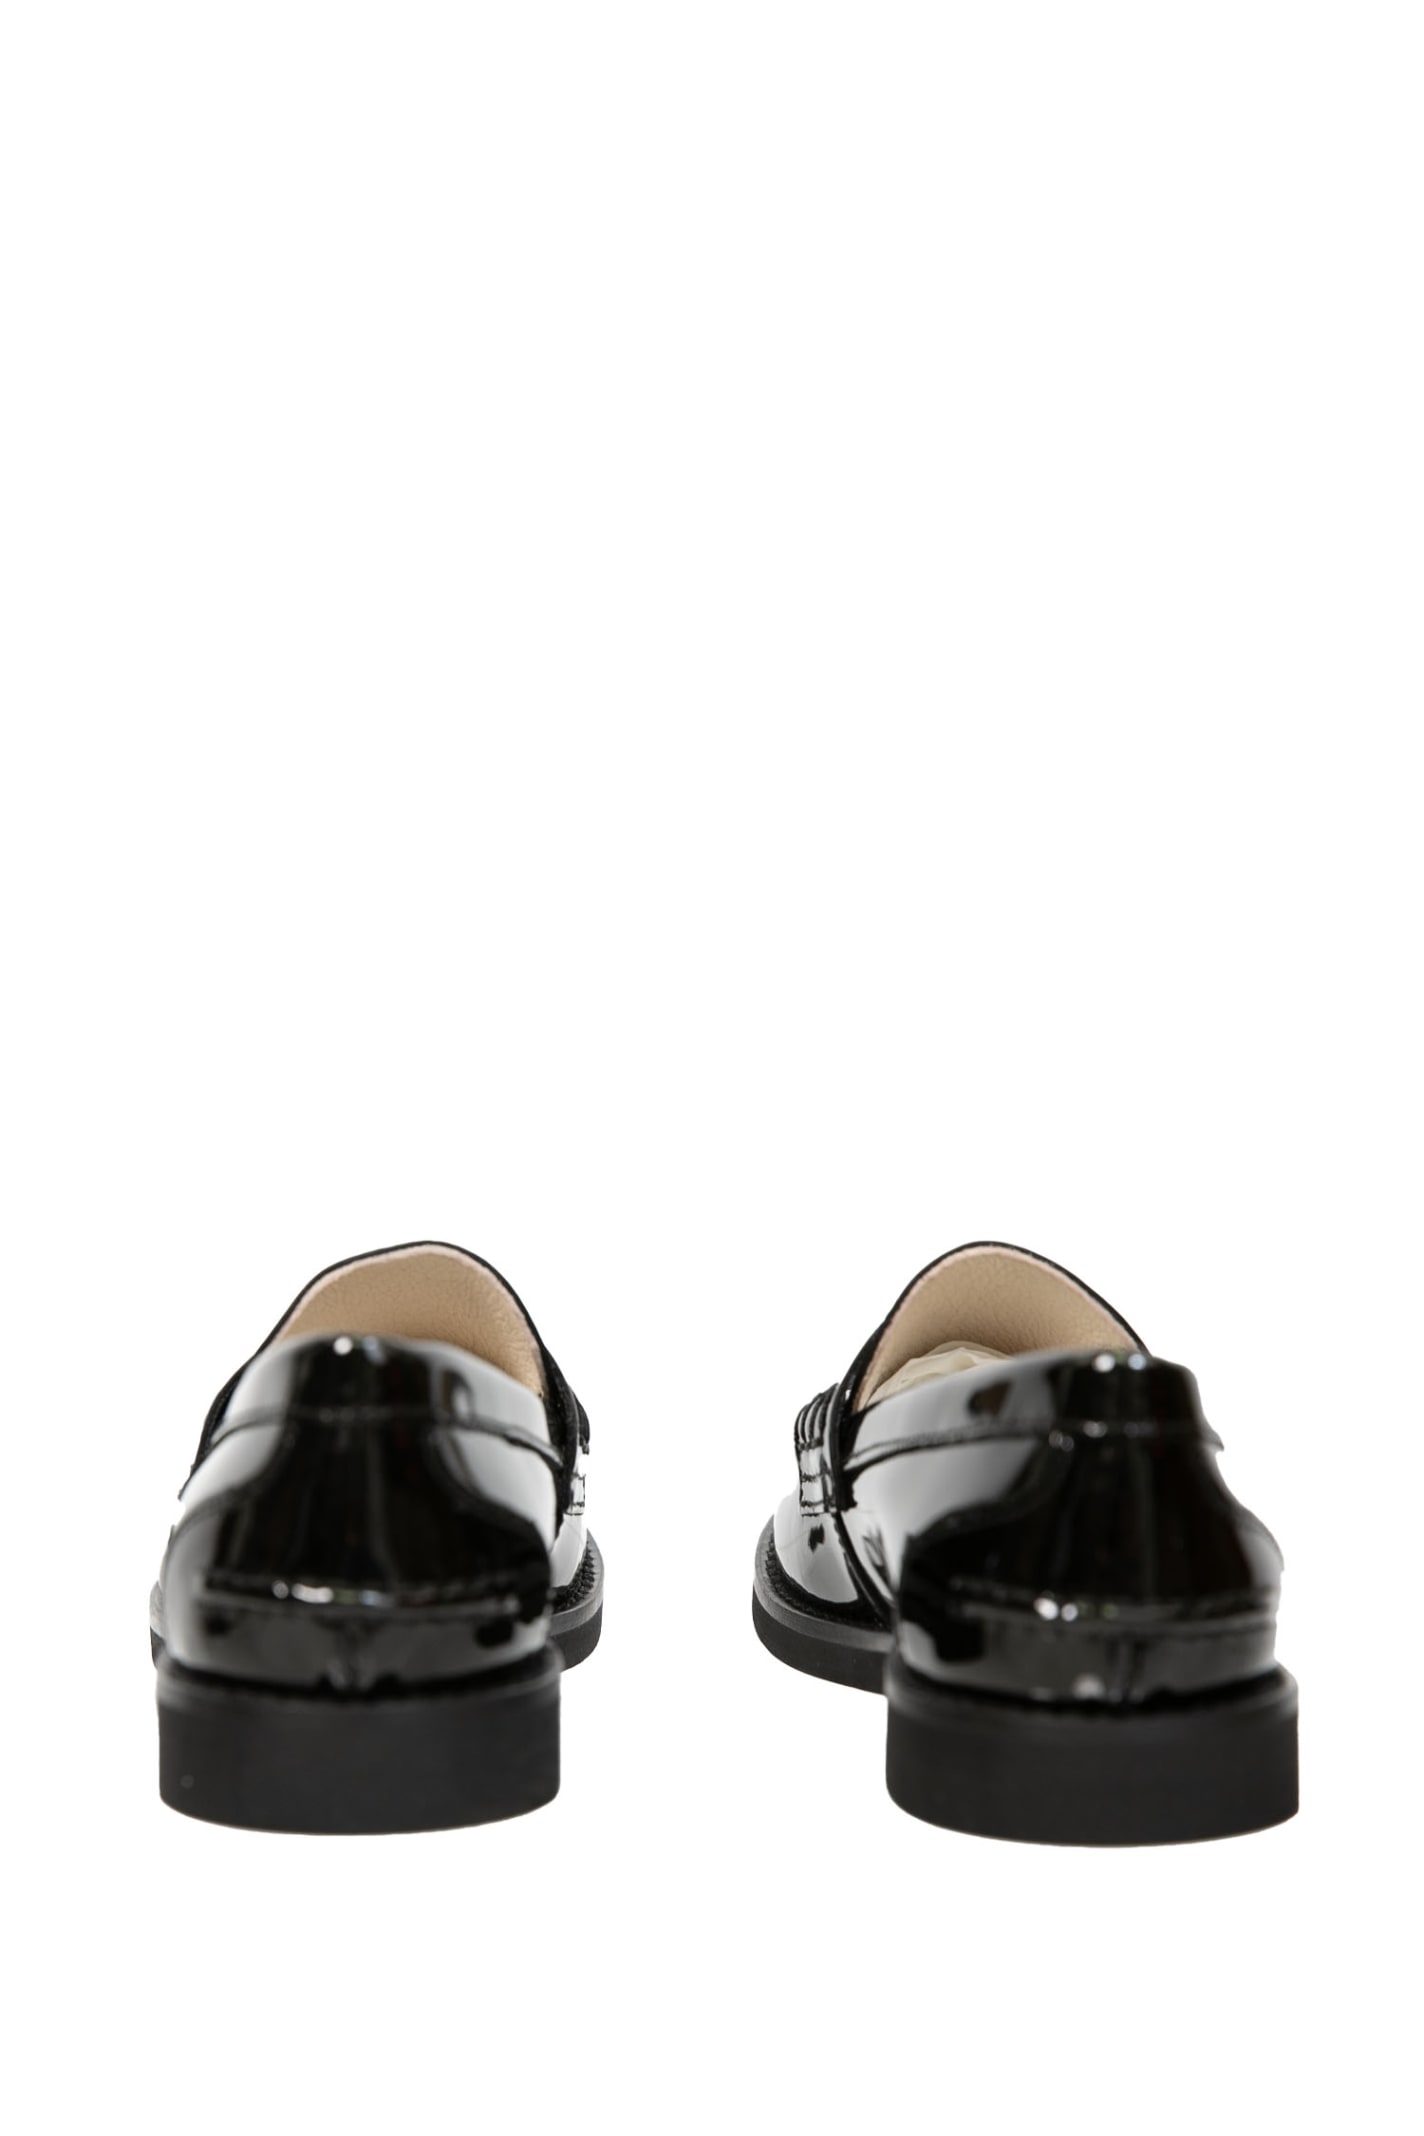 Shop Andrea Montelpare Patent Leather Loafers